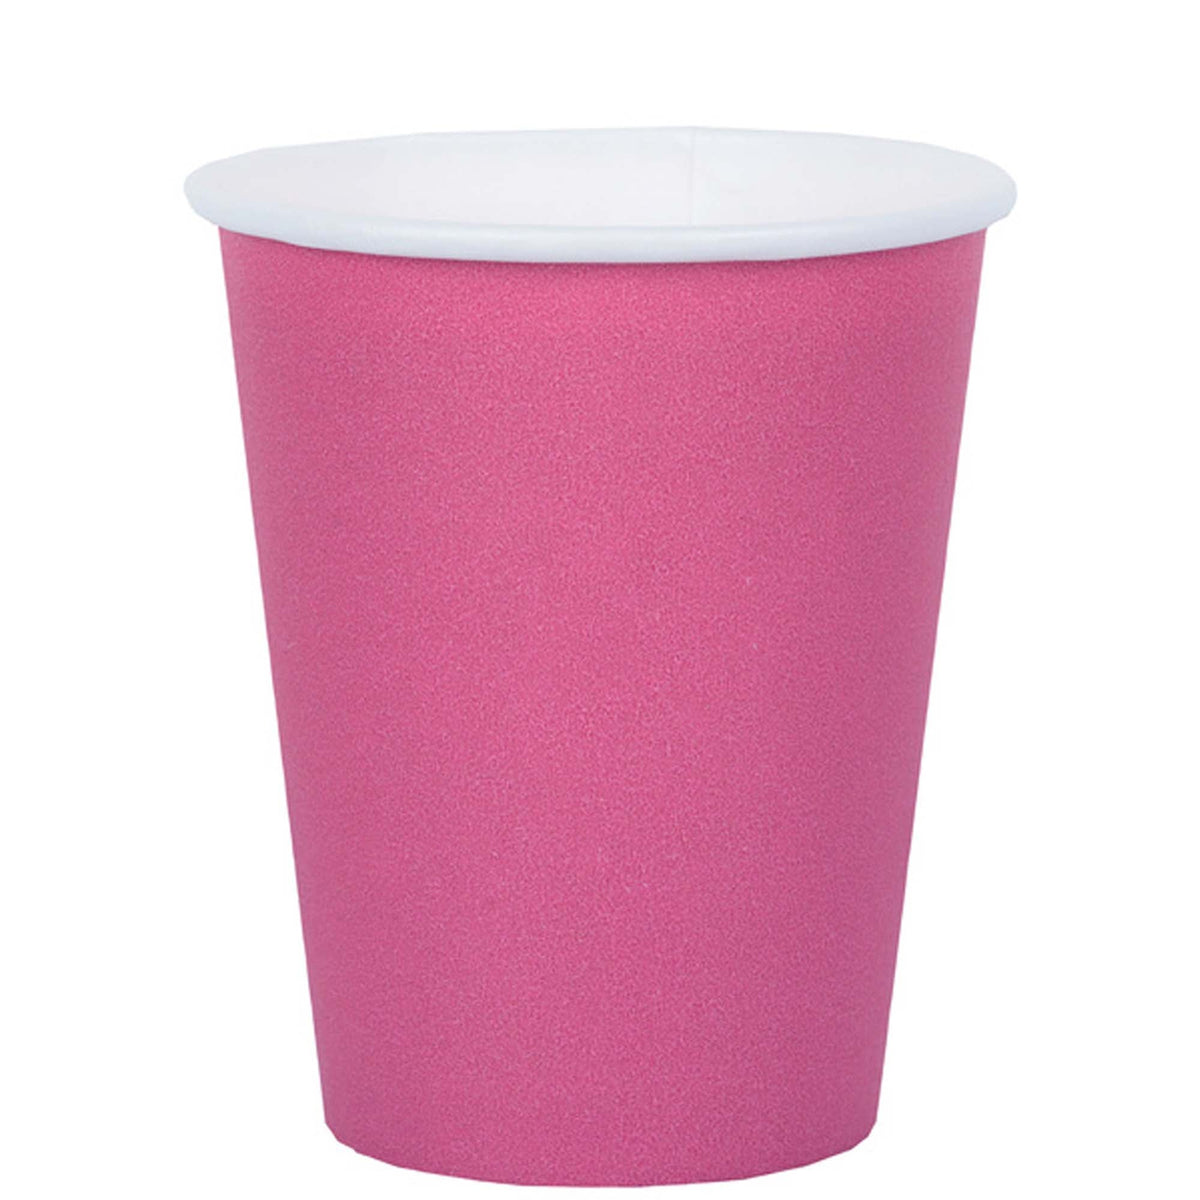 SANTEX Everyday Entertaining Candy Pink Party Paper Cups, 9 Oz, 10 Count